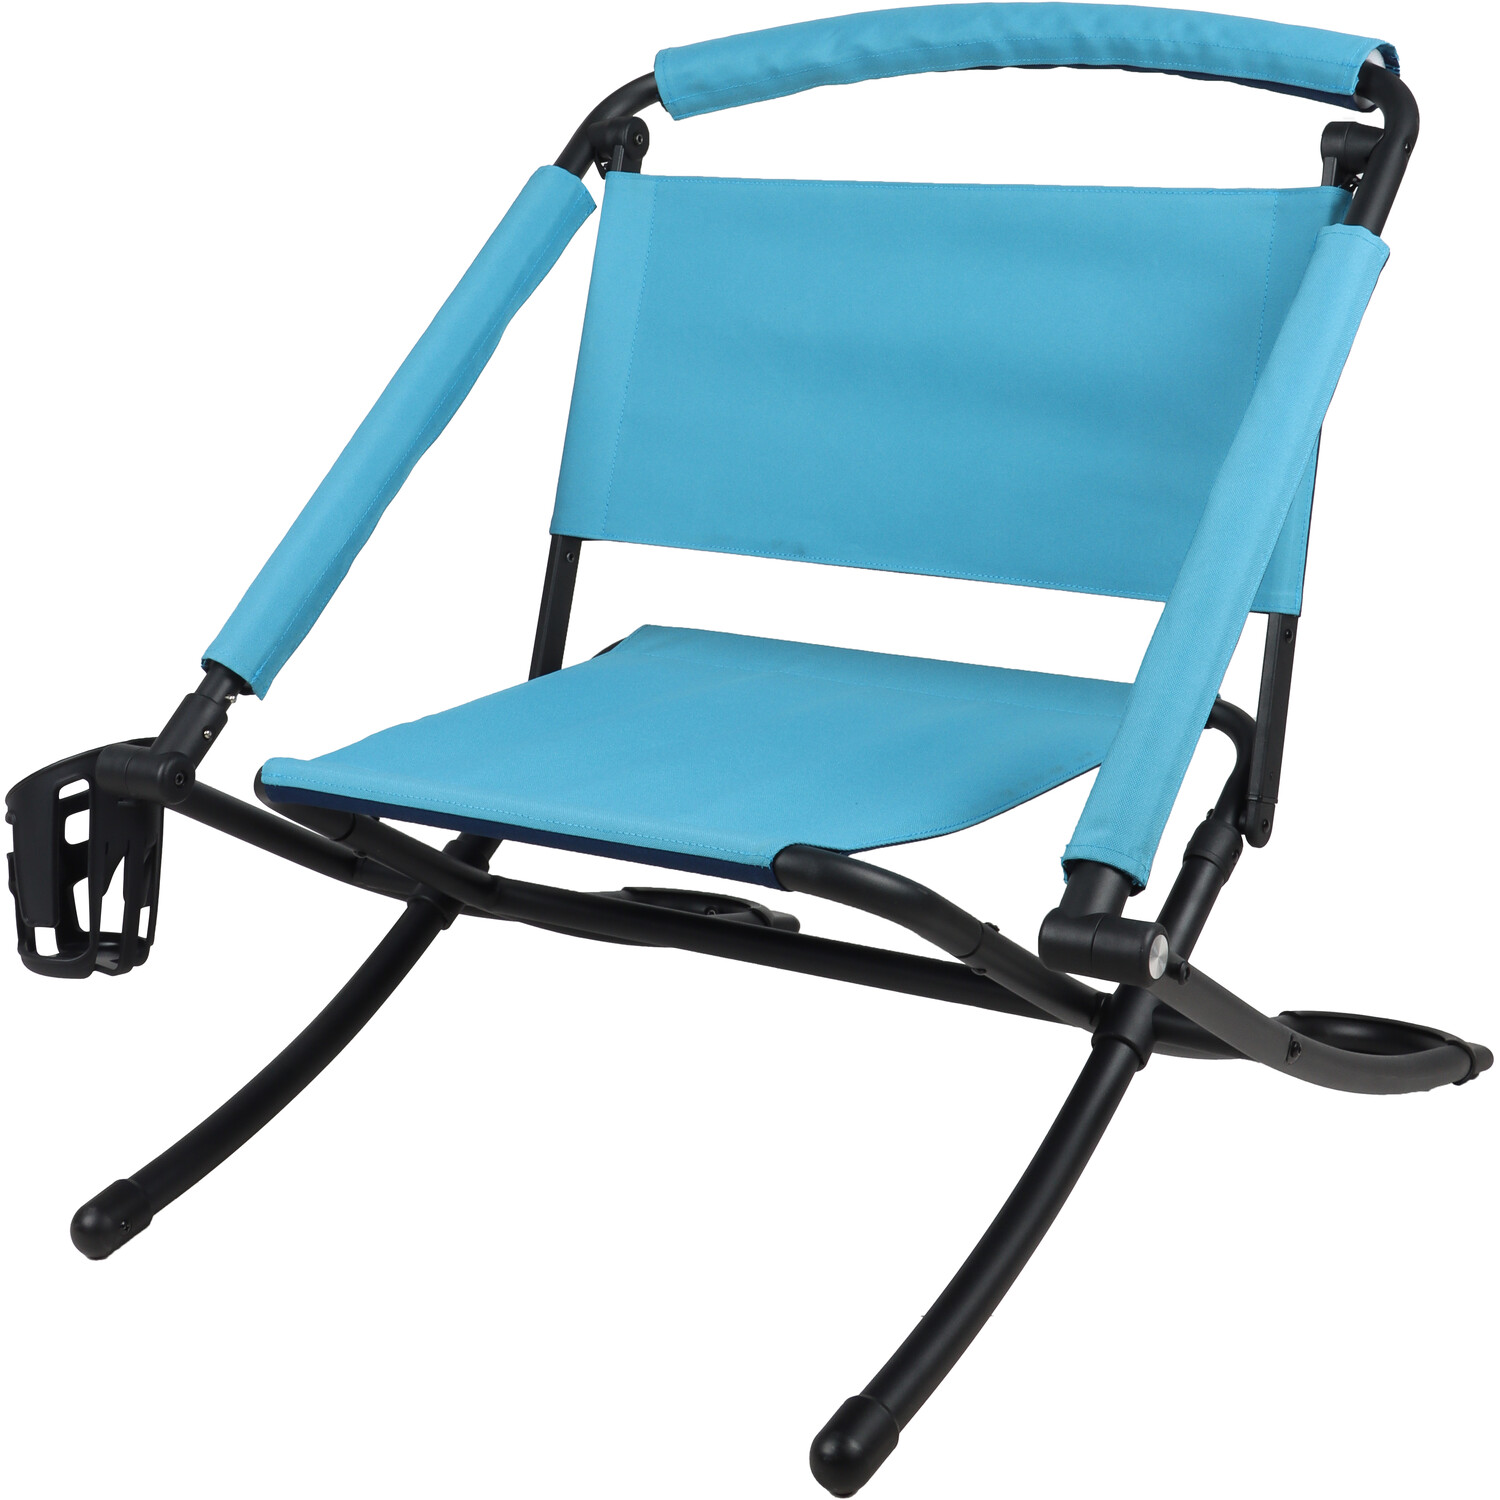 Multifunction Camping Chair Image 3